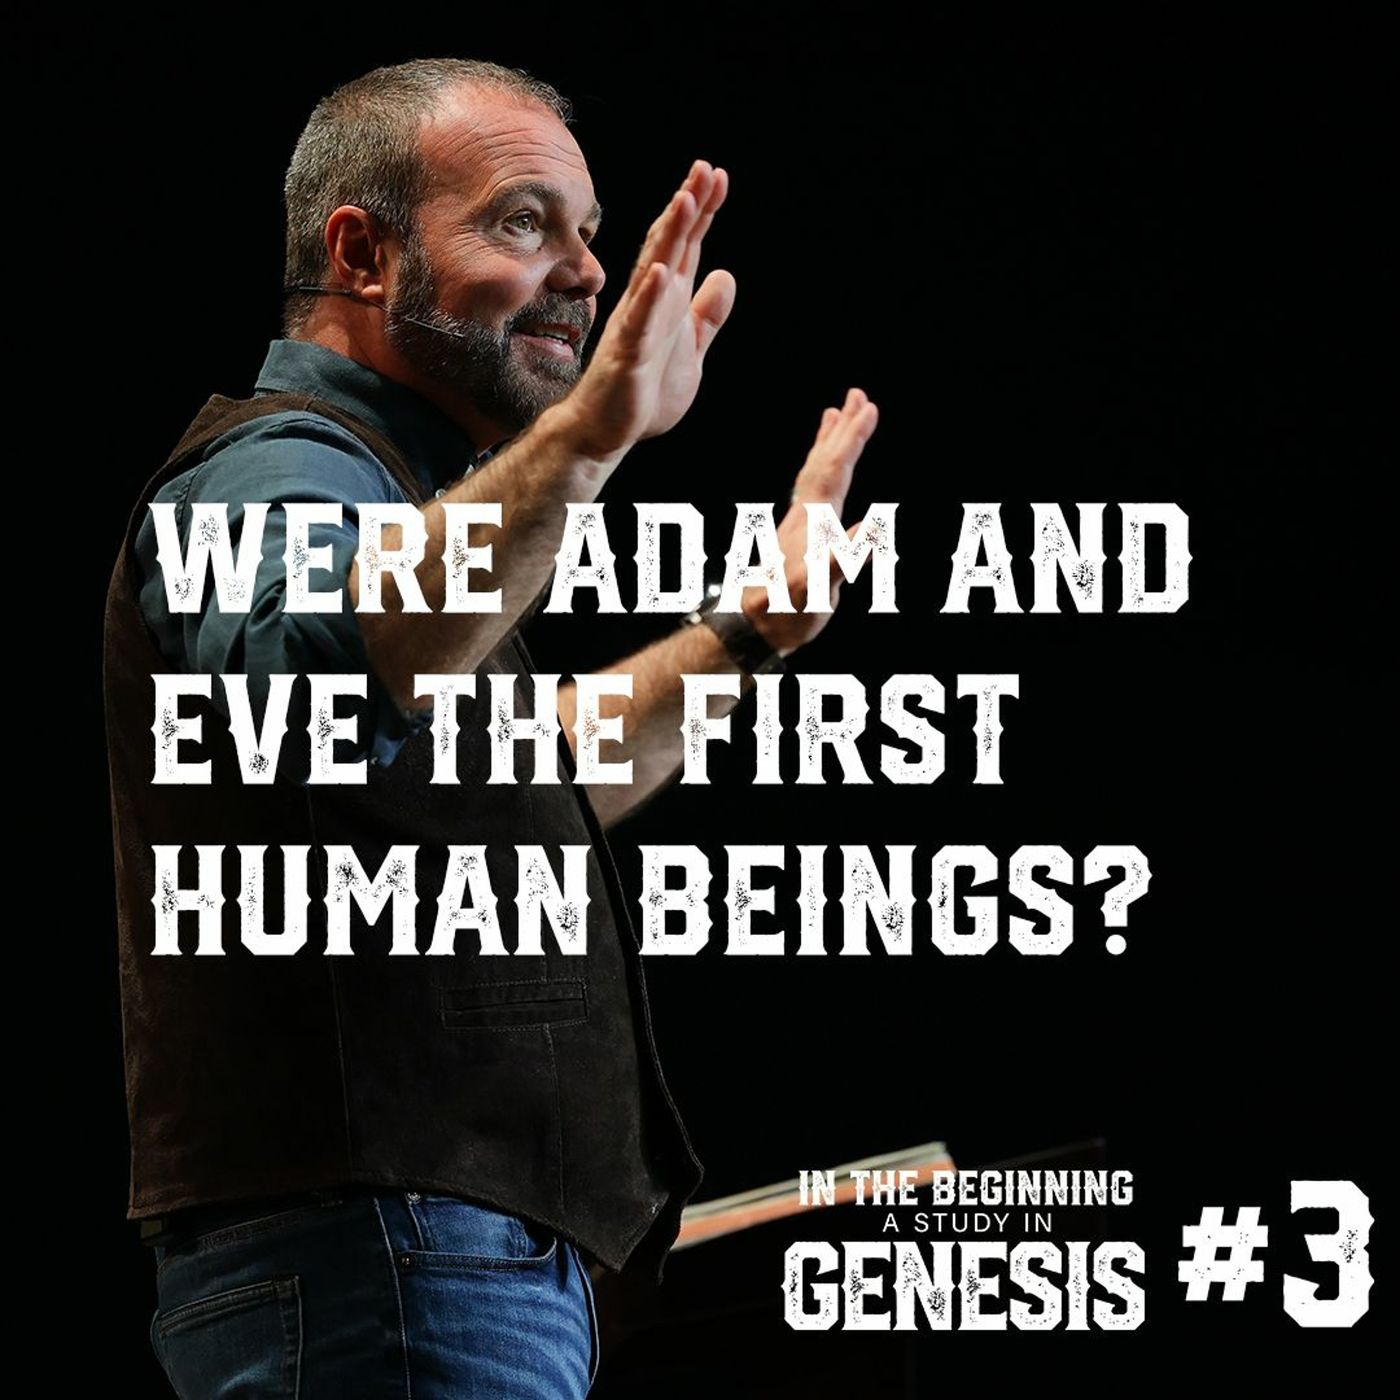 Genesis #3 - Were Adam and Eve the First Human Beings?